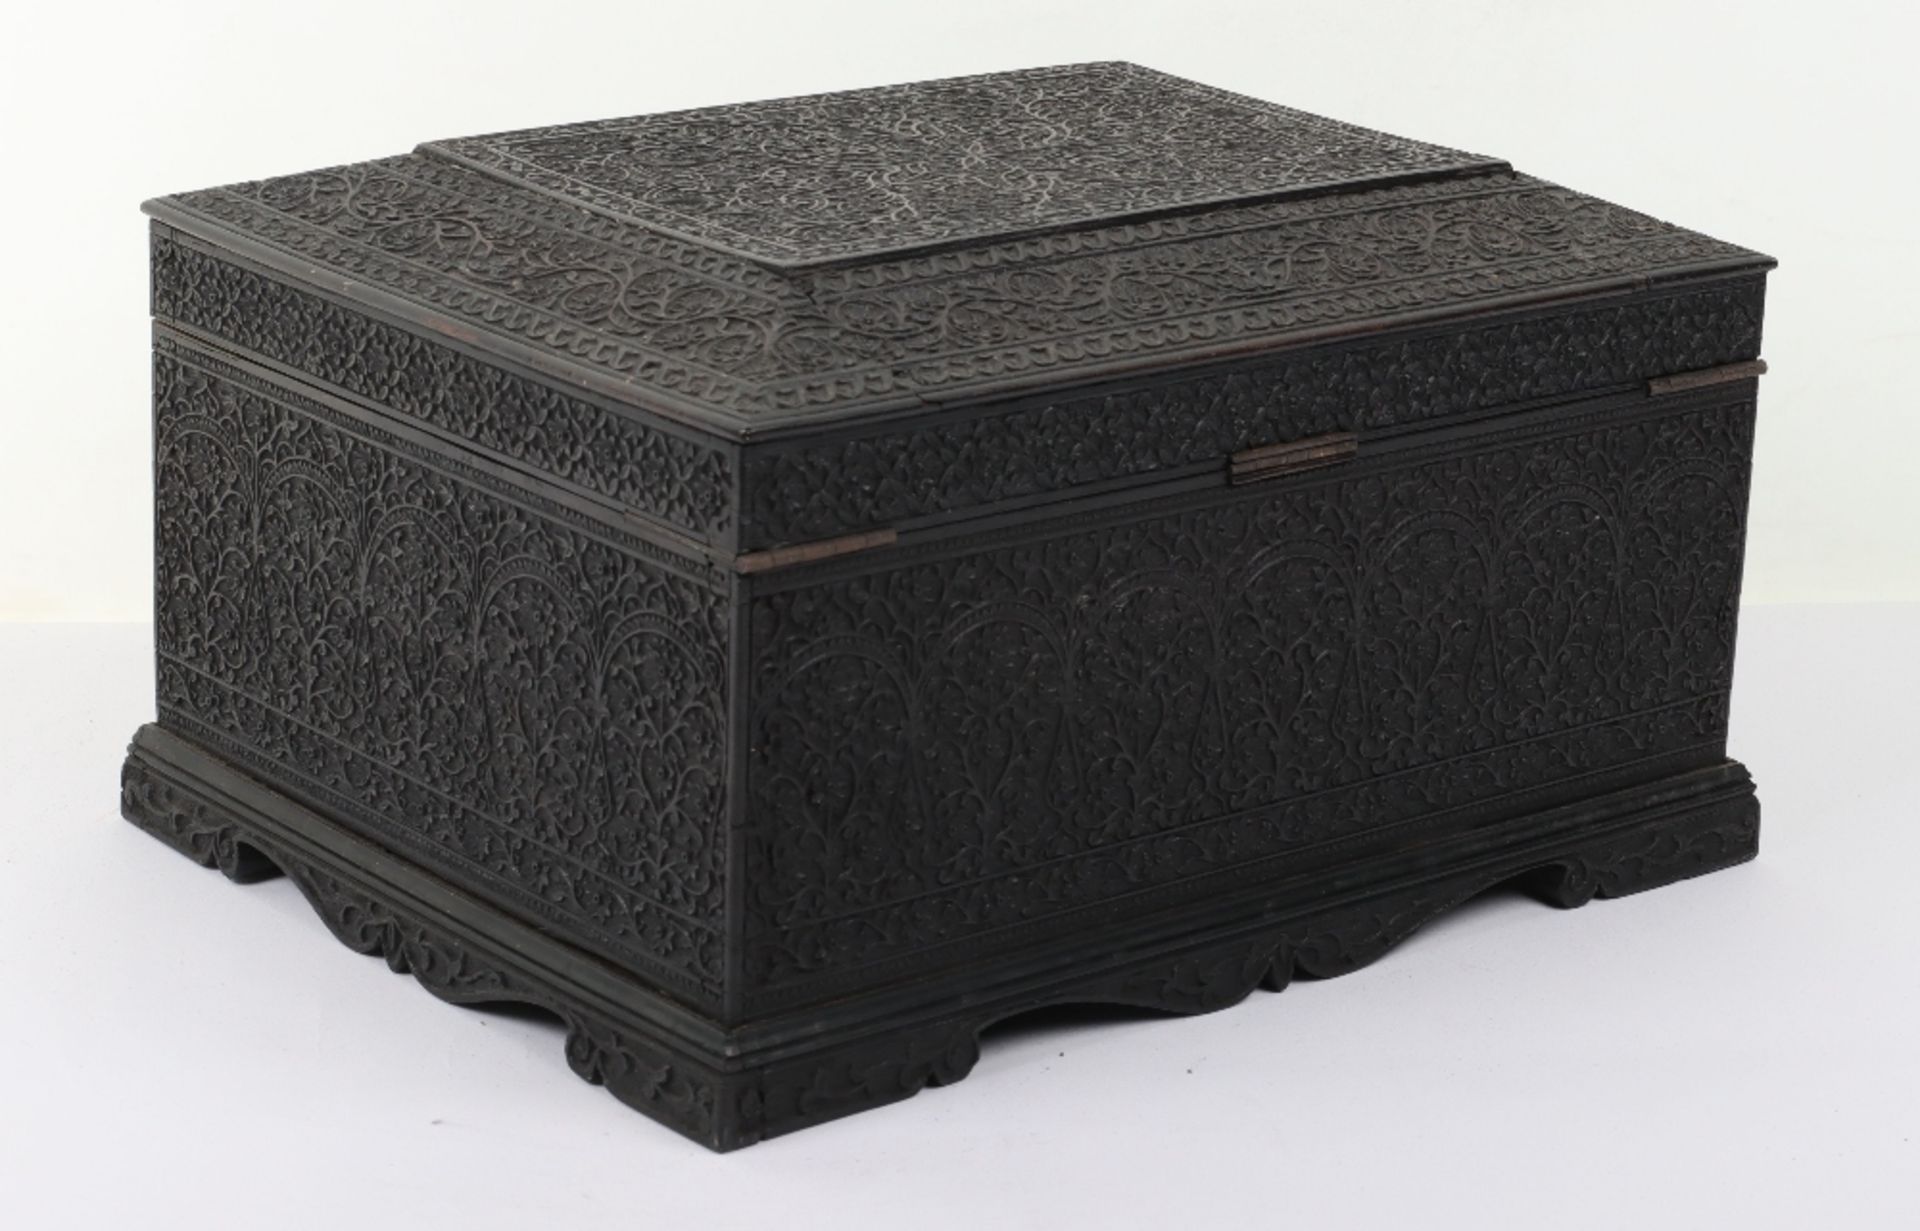 A fine Indian carved sandalwood casket, 19th century, probably Mysore